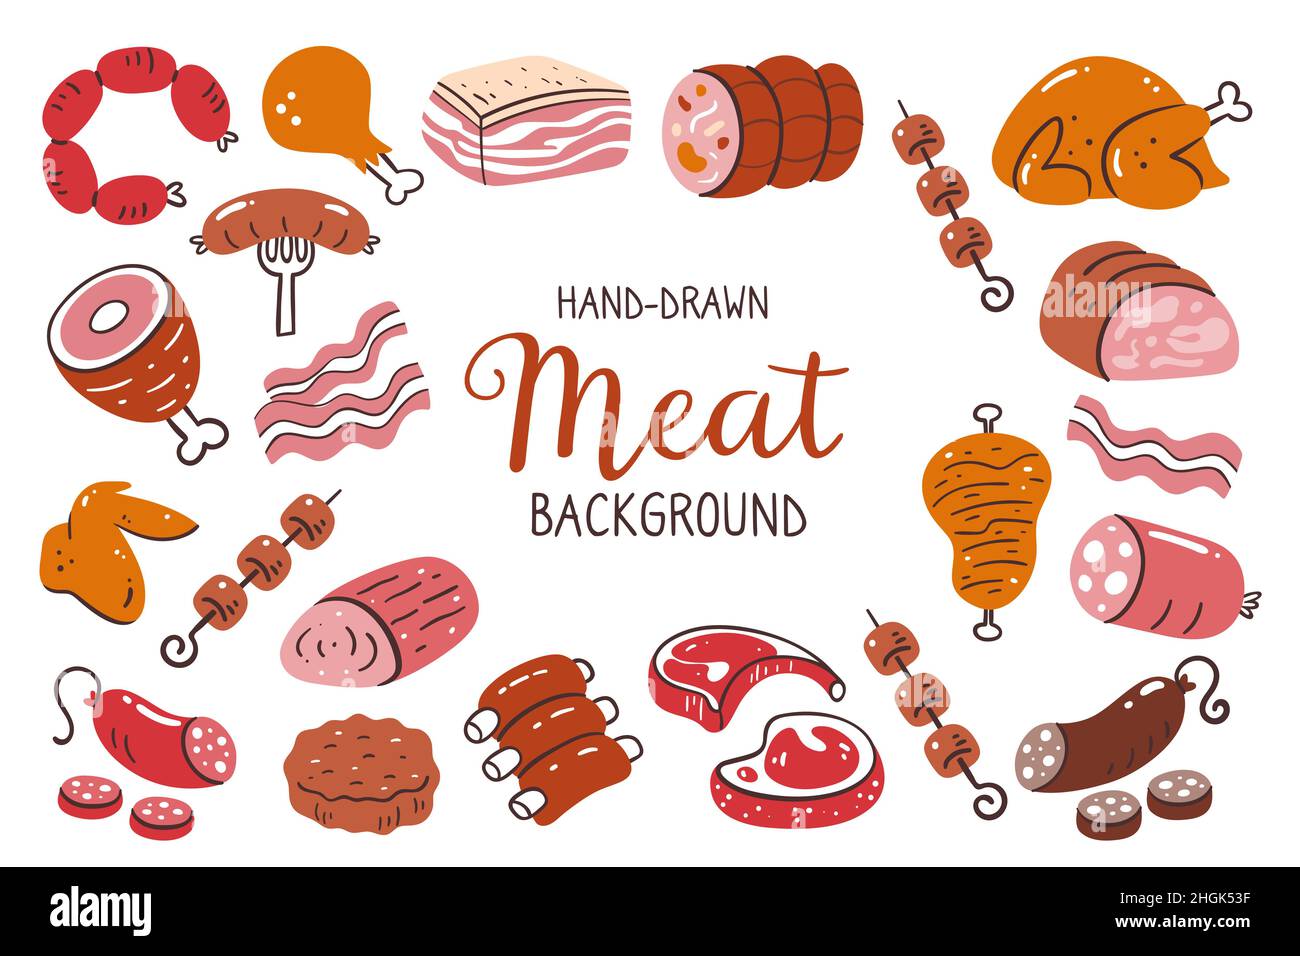 Meat background. Pieces of meat and meat products. Food ingredients for cooking illustration. Isolated colorful hand-drawn icons on white background. Stock Vector